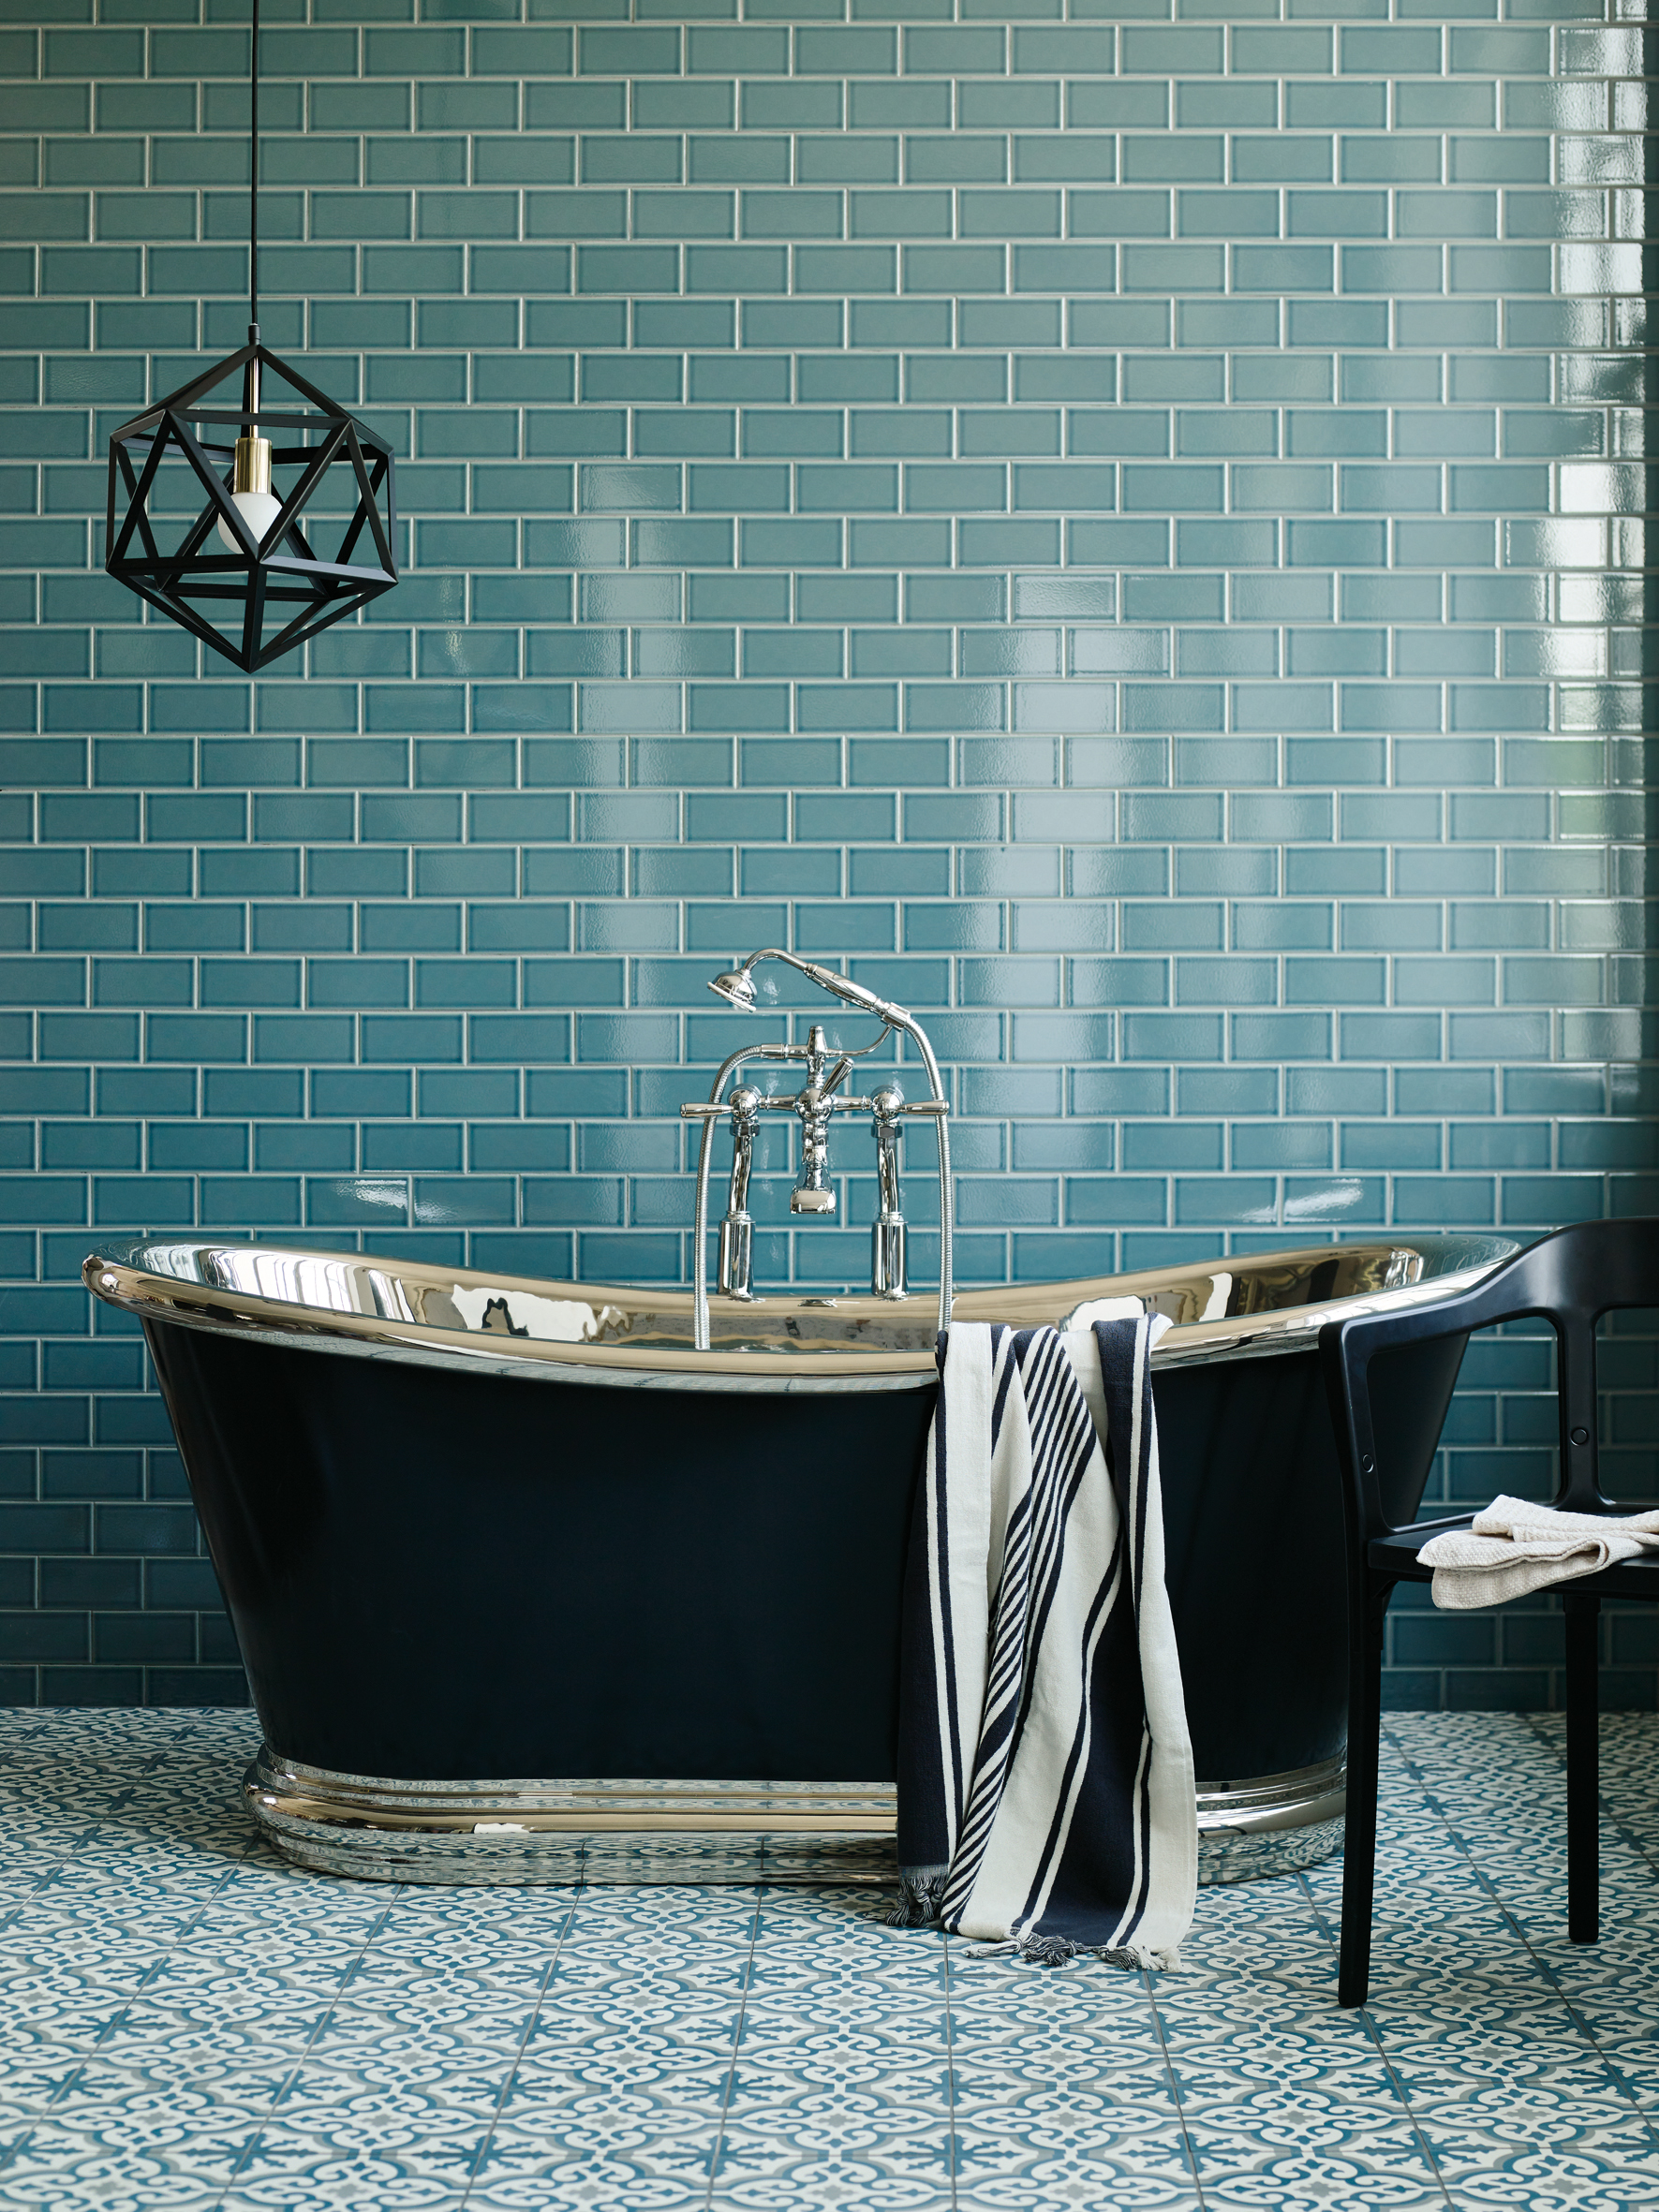 Patterned tiles in a turquoise bathroom with freestanding bath